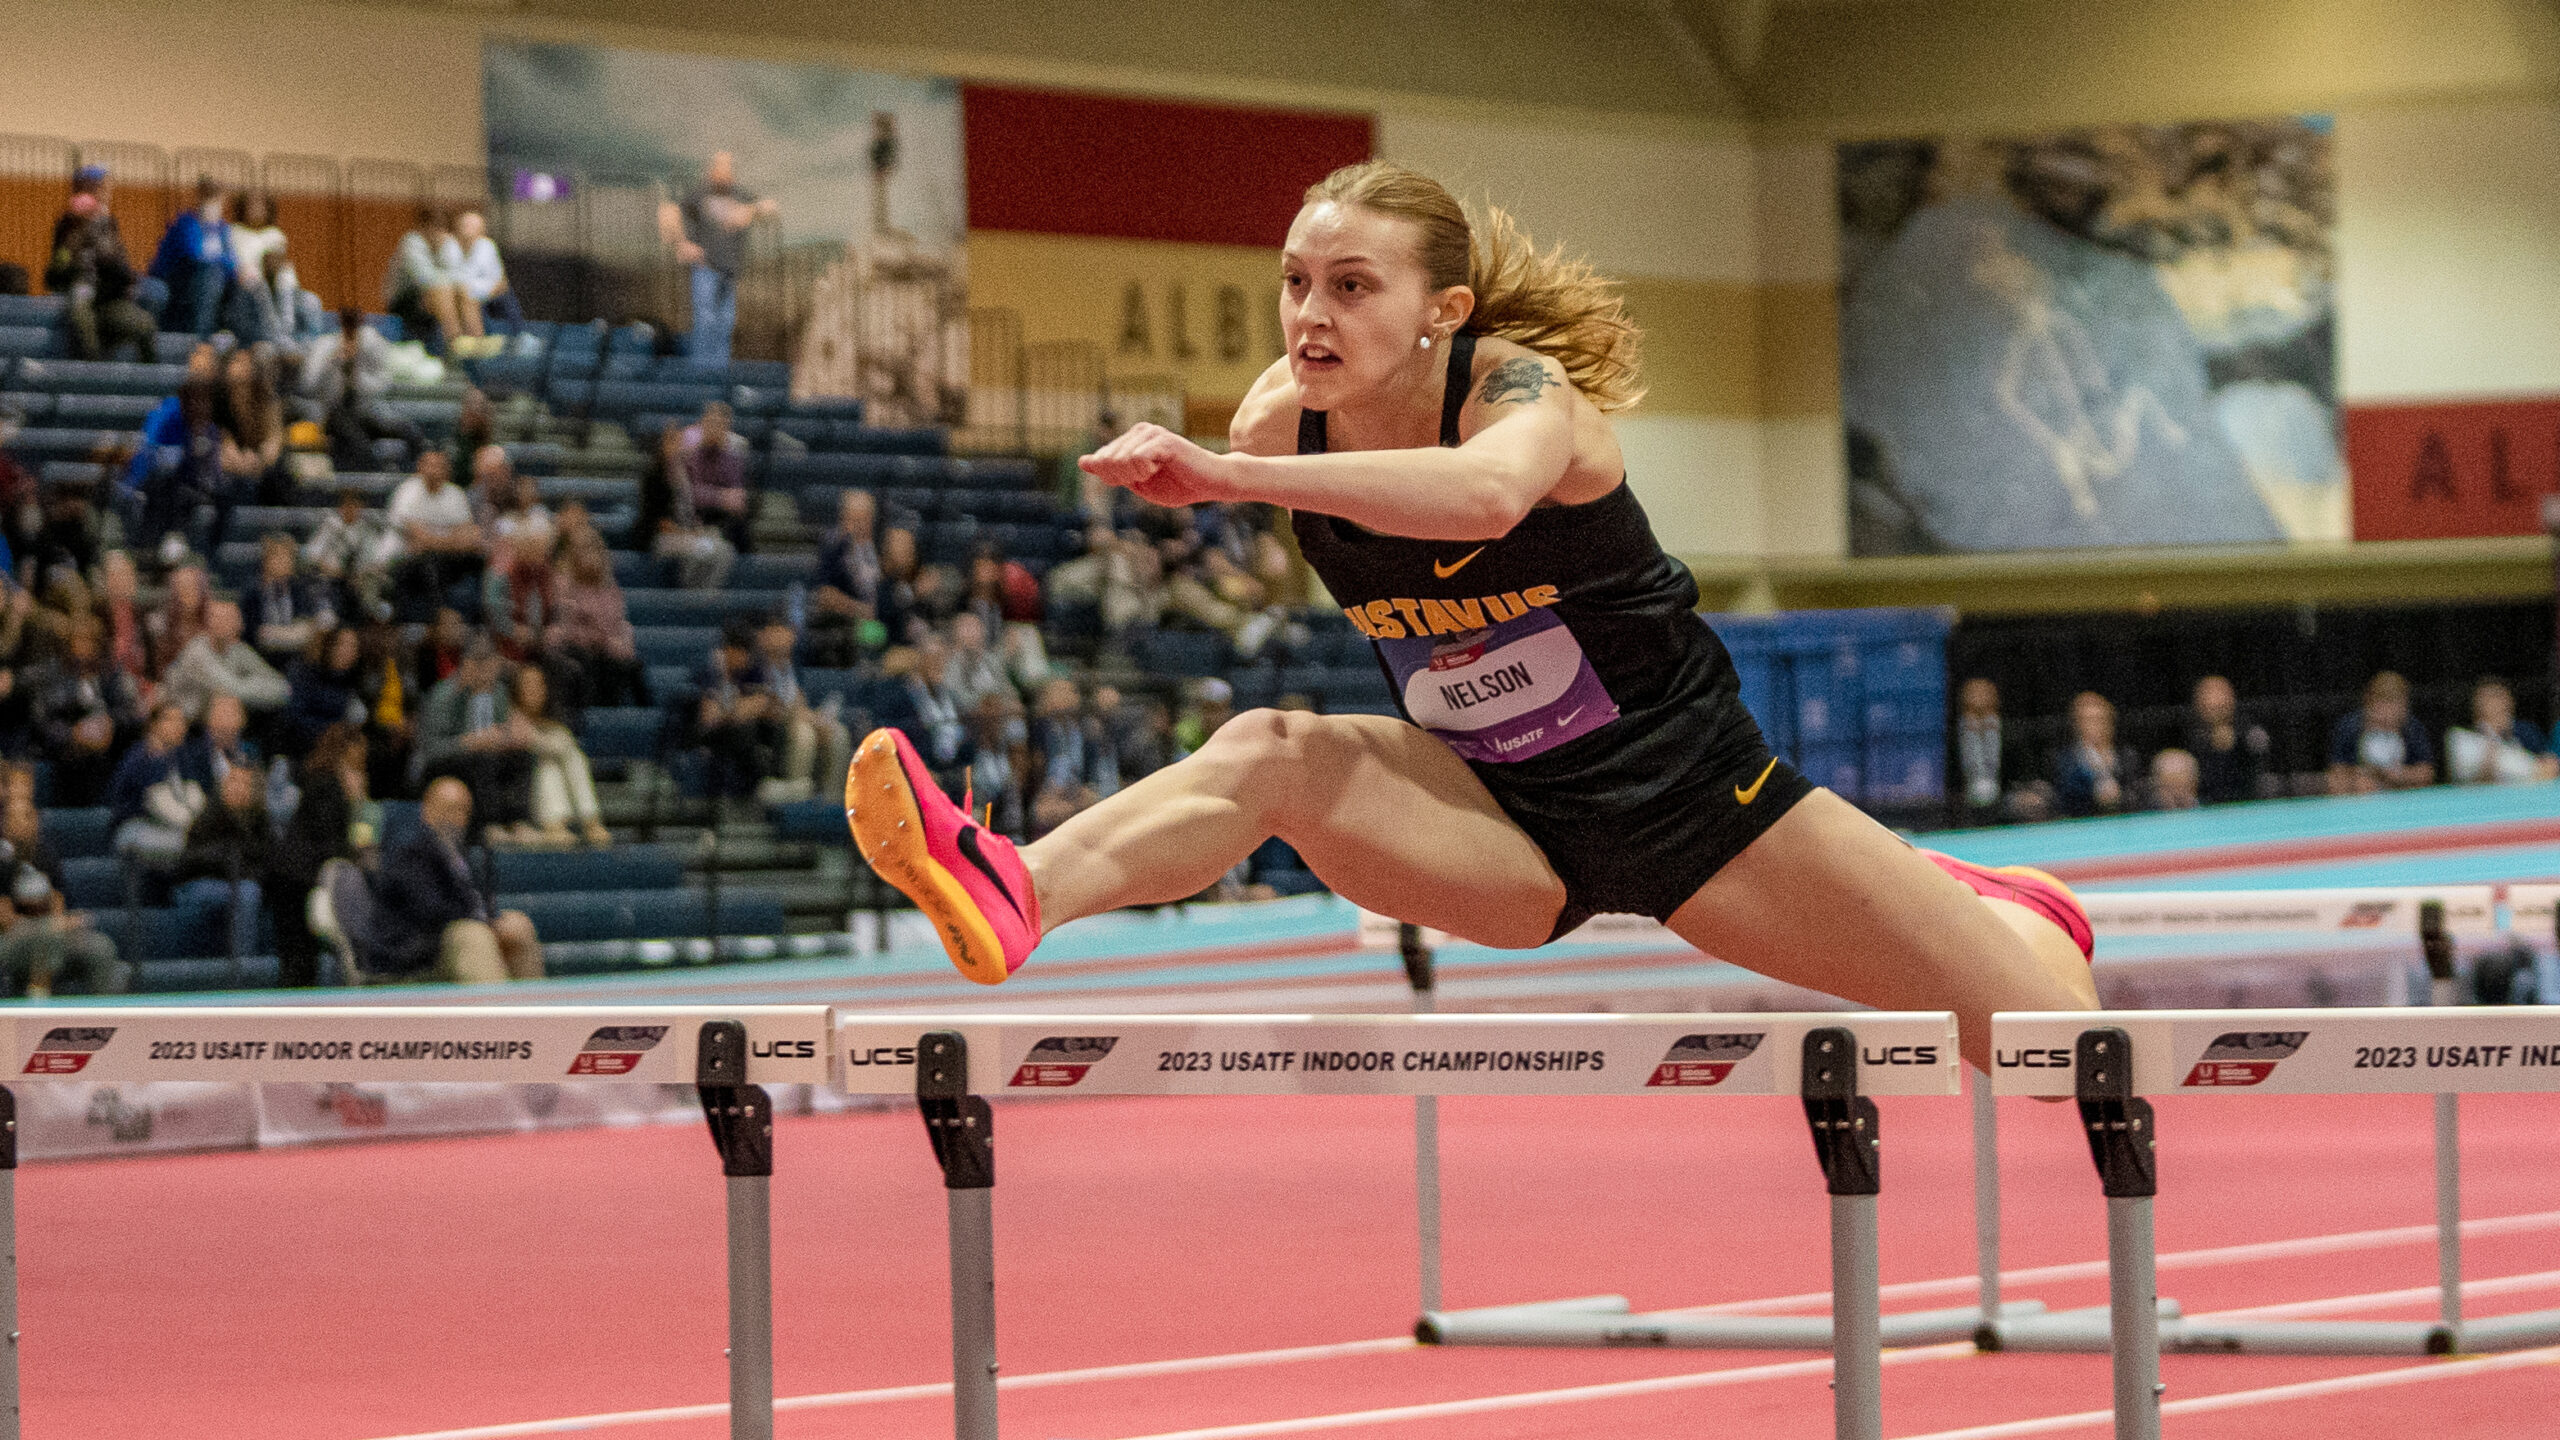 Nelson Takes Sixth in 60H at USATF Indoor Championships, Sets DIII Record -  Posted on February 18th, 2023 by CJ Siewert